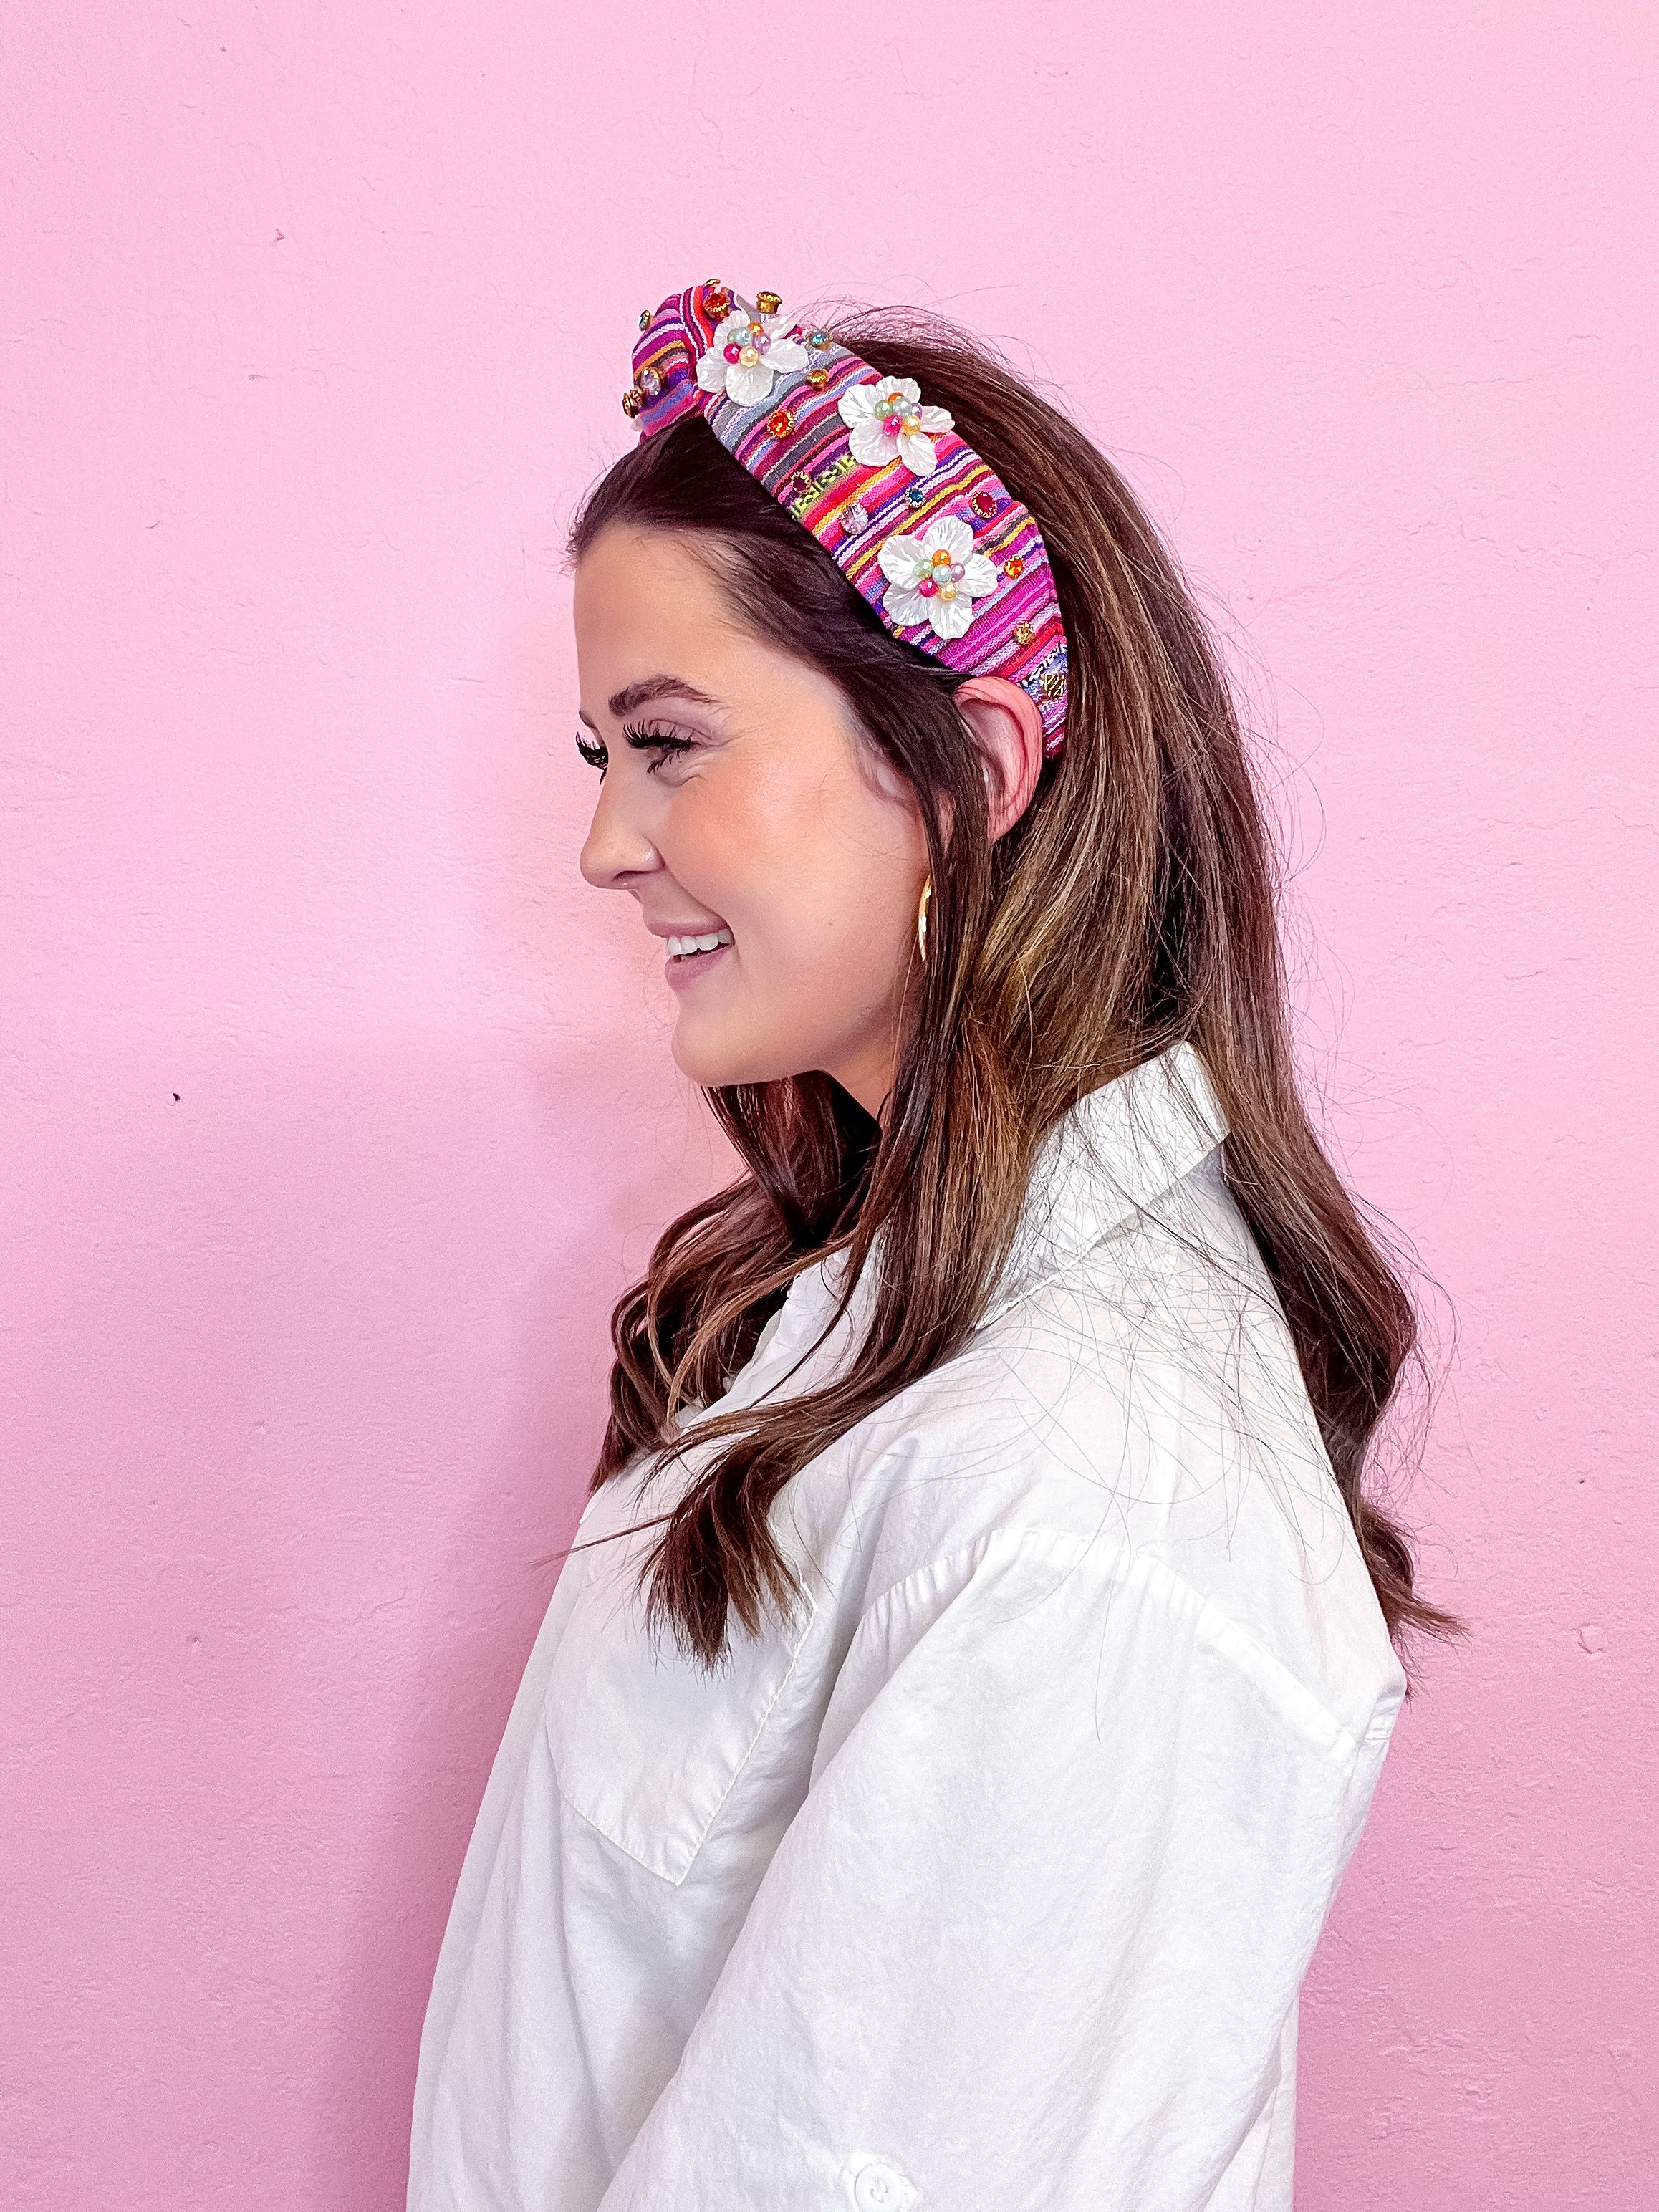 Fiesta Serape Headband with 3D Flowers and Crystals